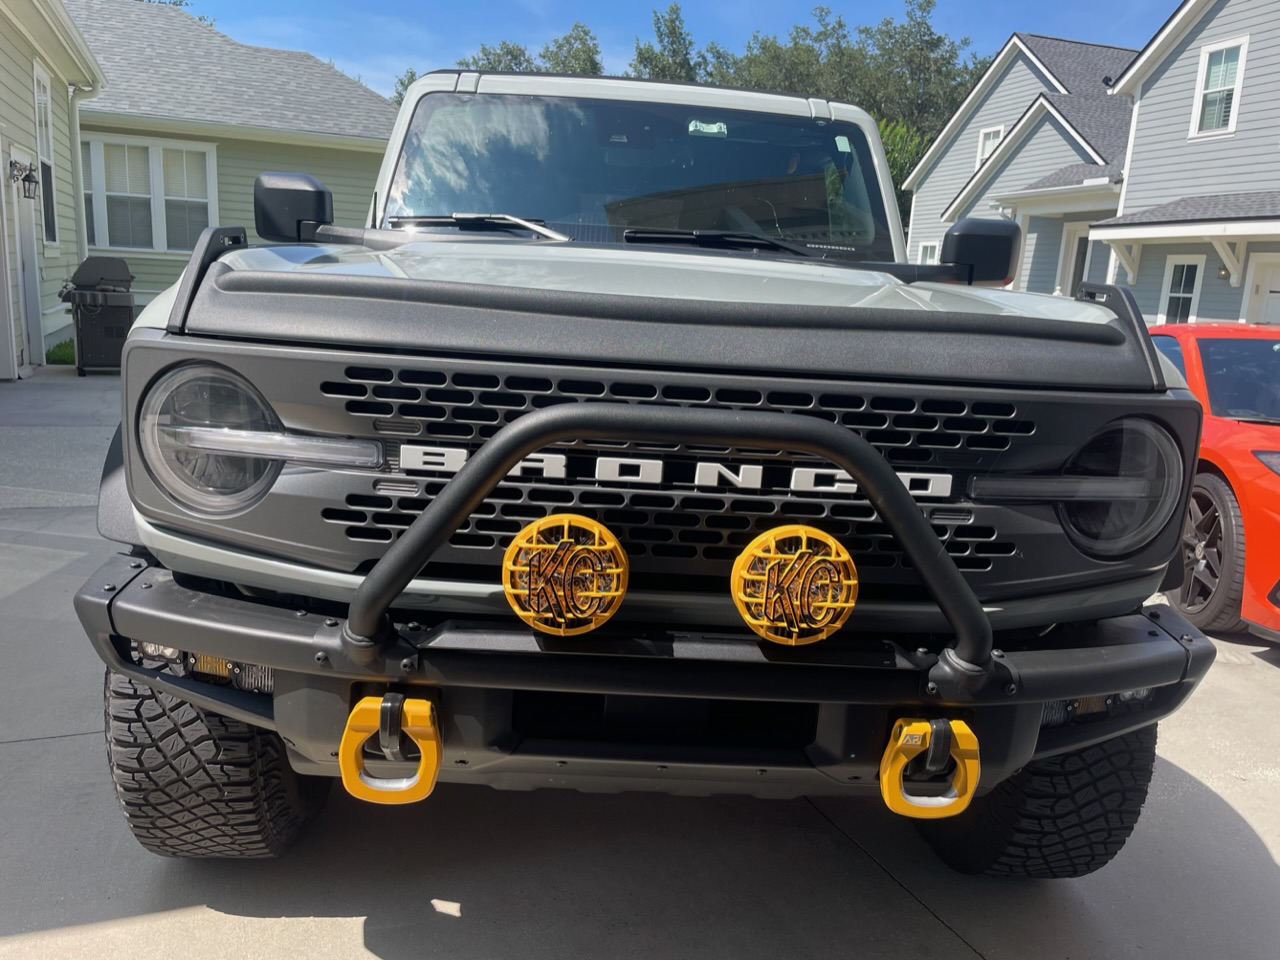 Ford Bronco Does anyone offer 4 round lights that fit inside the factory brush guard? 038EAAE3-BD67-4FF7-9EB7-126EEDE0FB6A